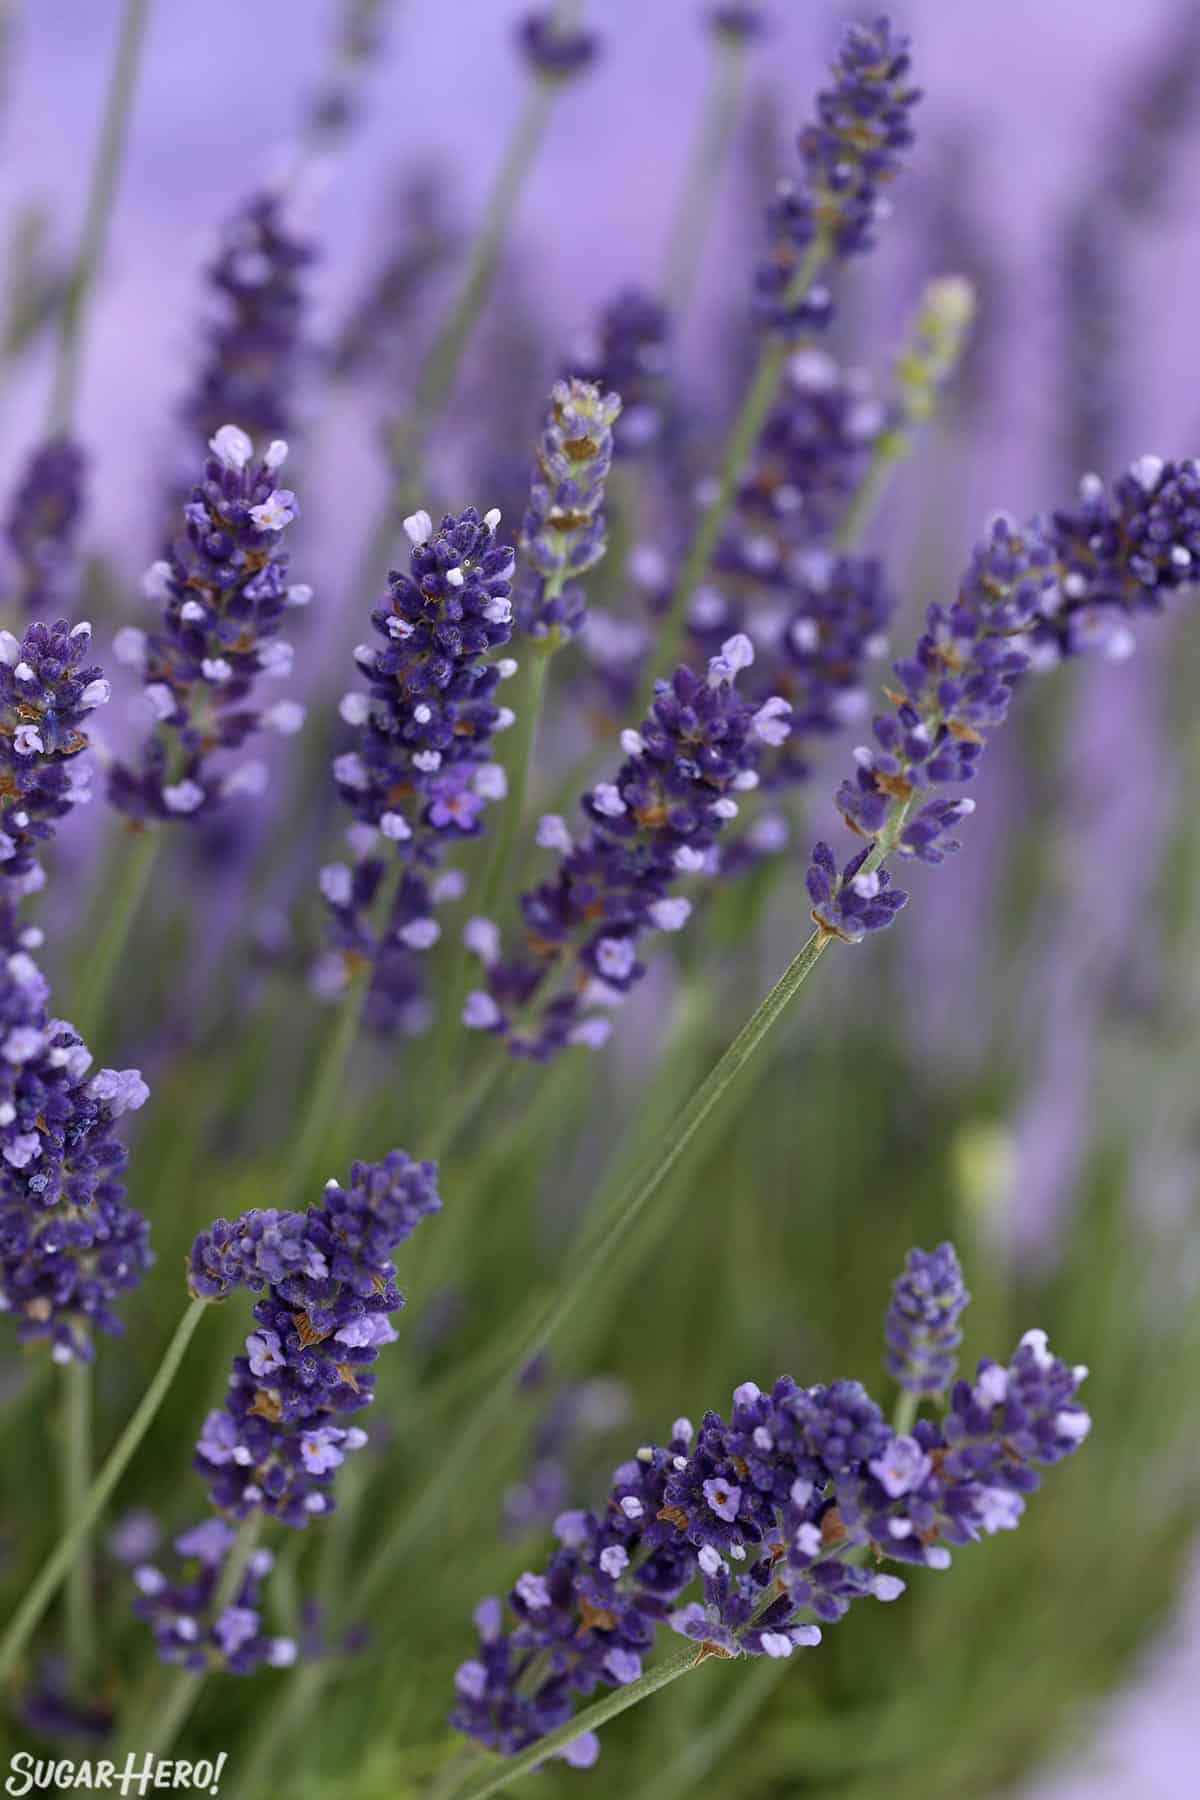 Close-up of culinary lavender with blooming buds, in front of a purple background.